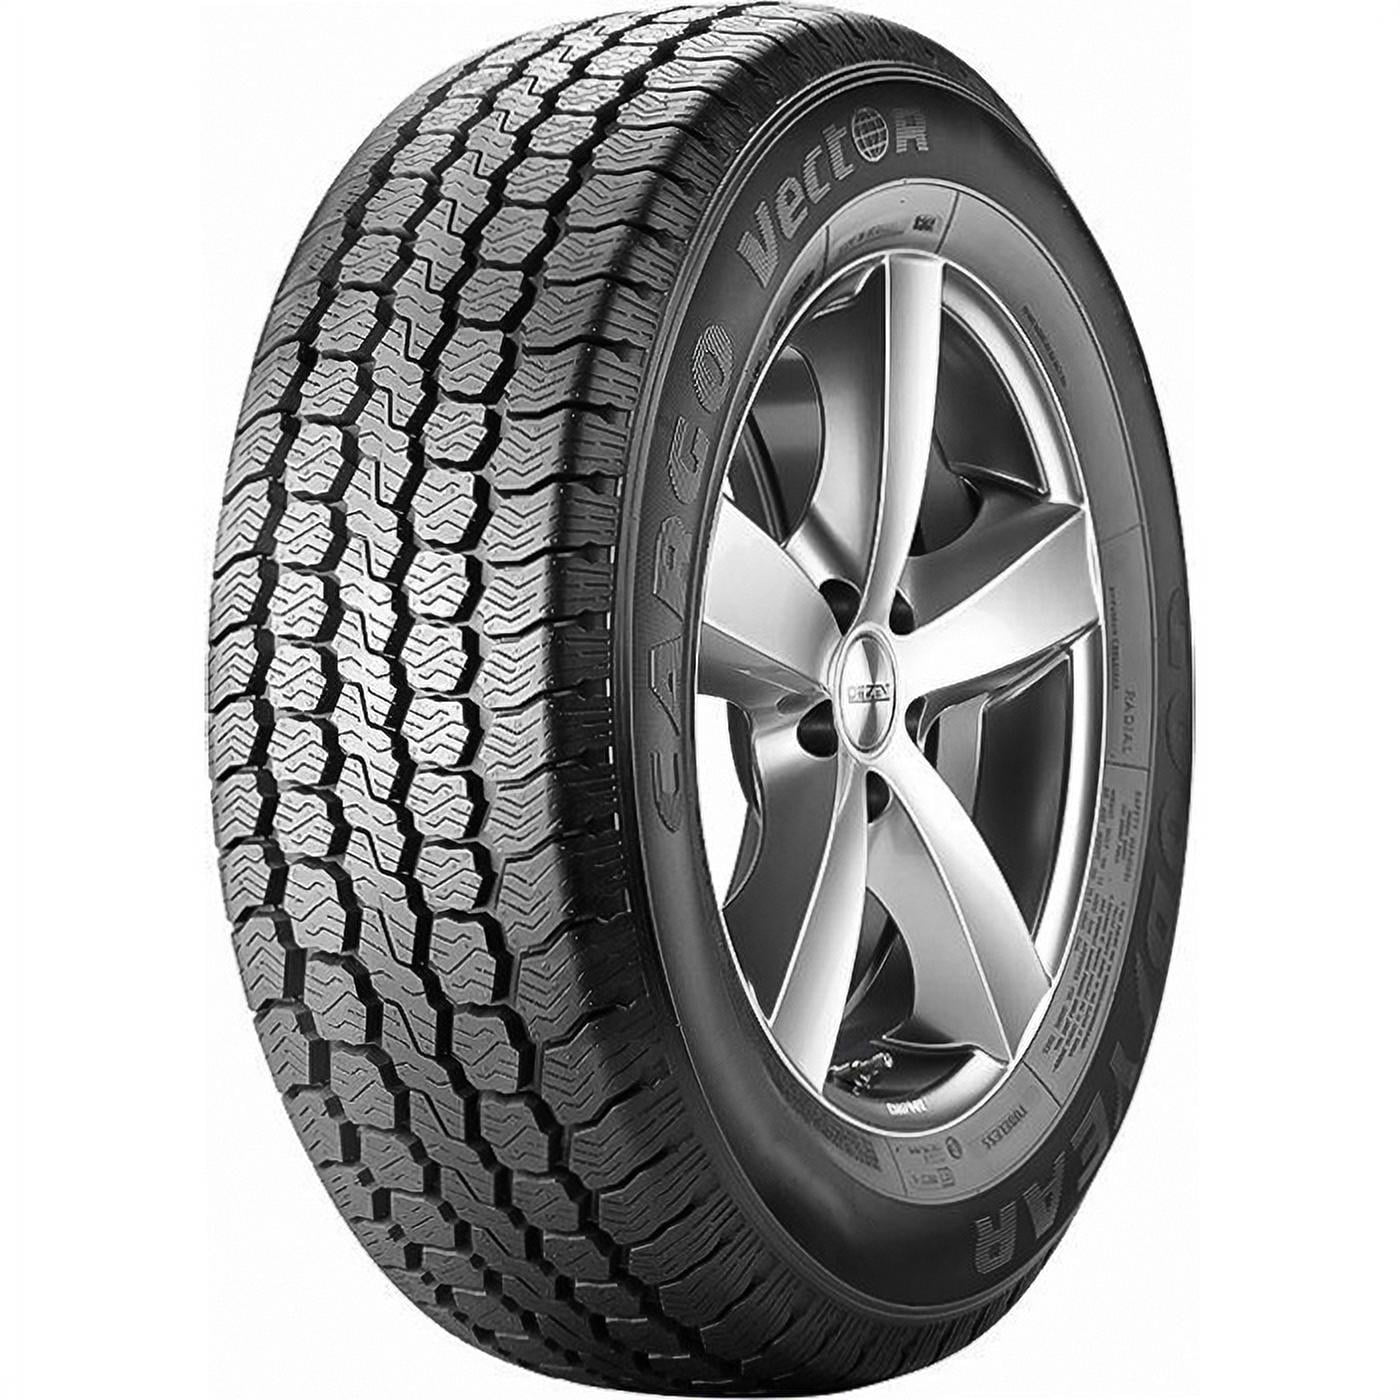 Load Cargo 285/65R16 Goodyear Tire D Commercial 8 Ply Vector